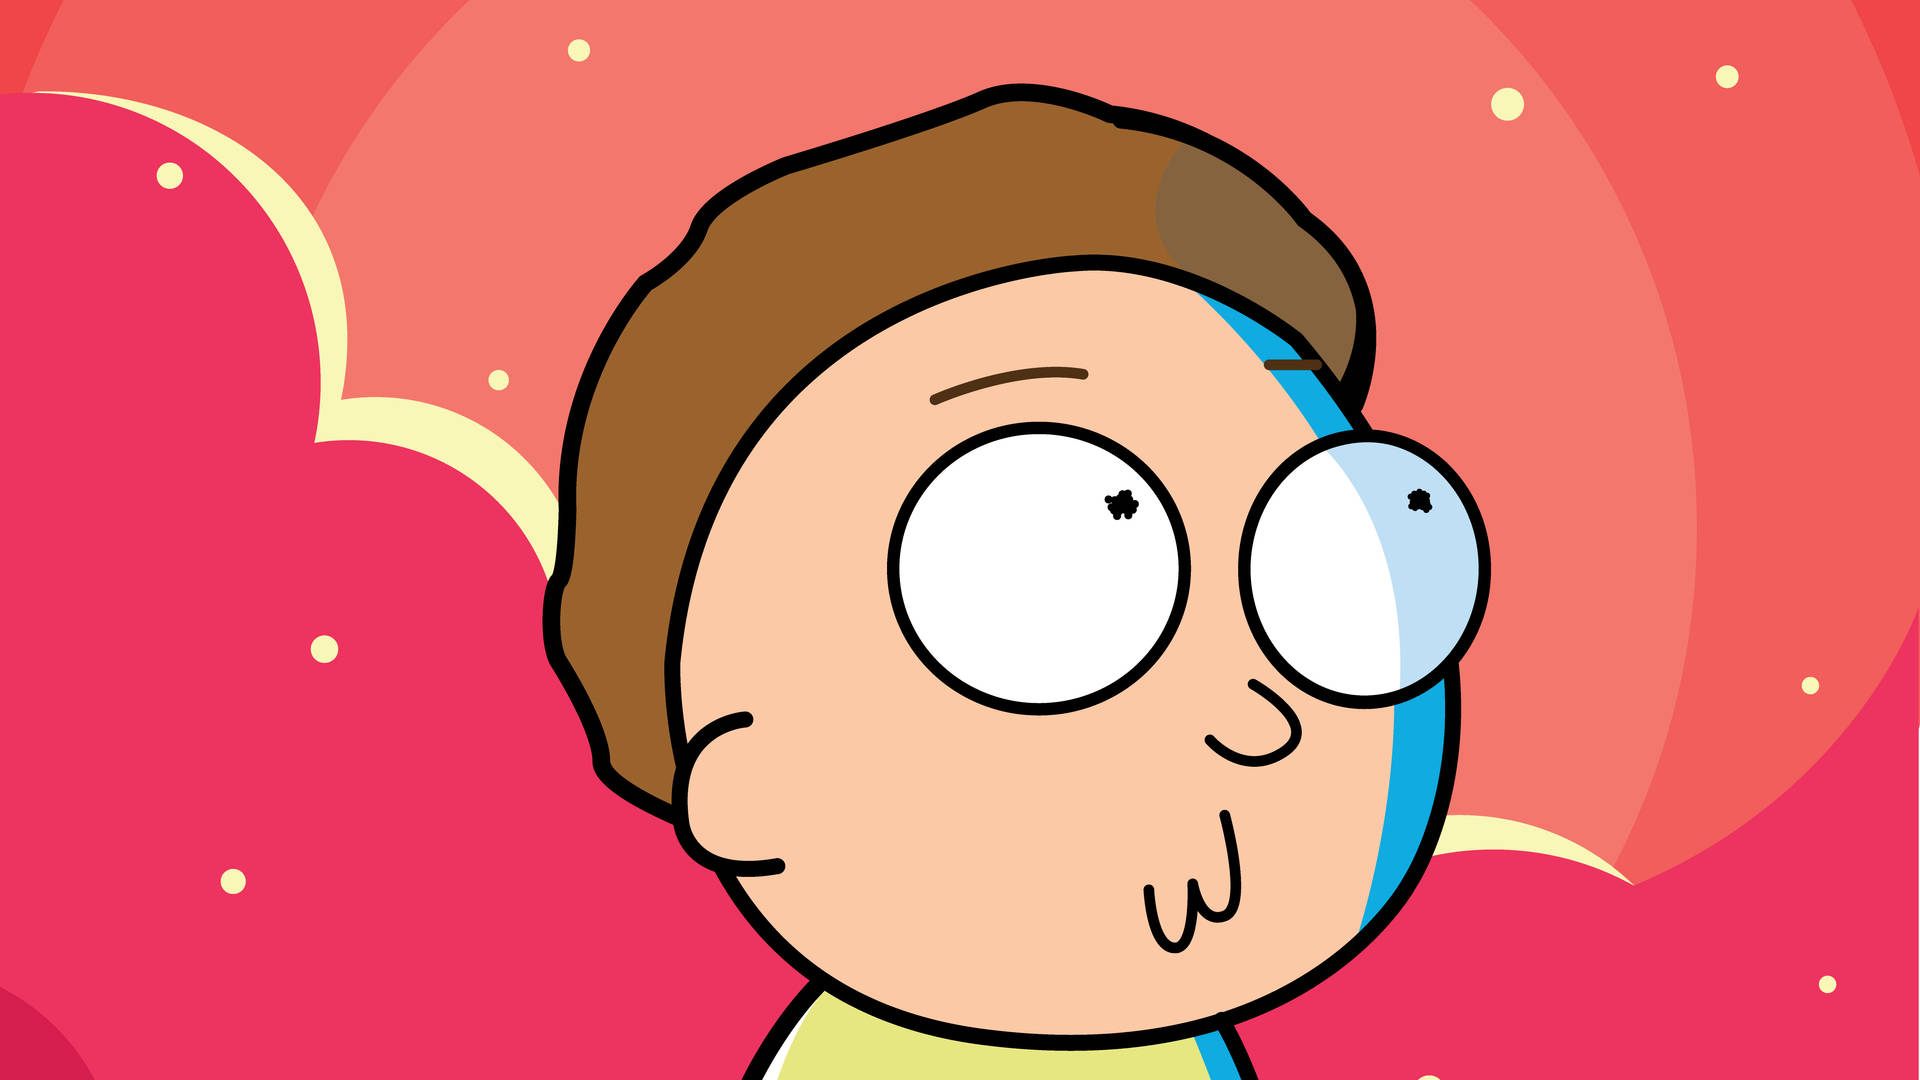 Rick And Morty Pc 4k Dumbfounded Expression Background